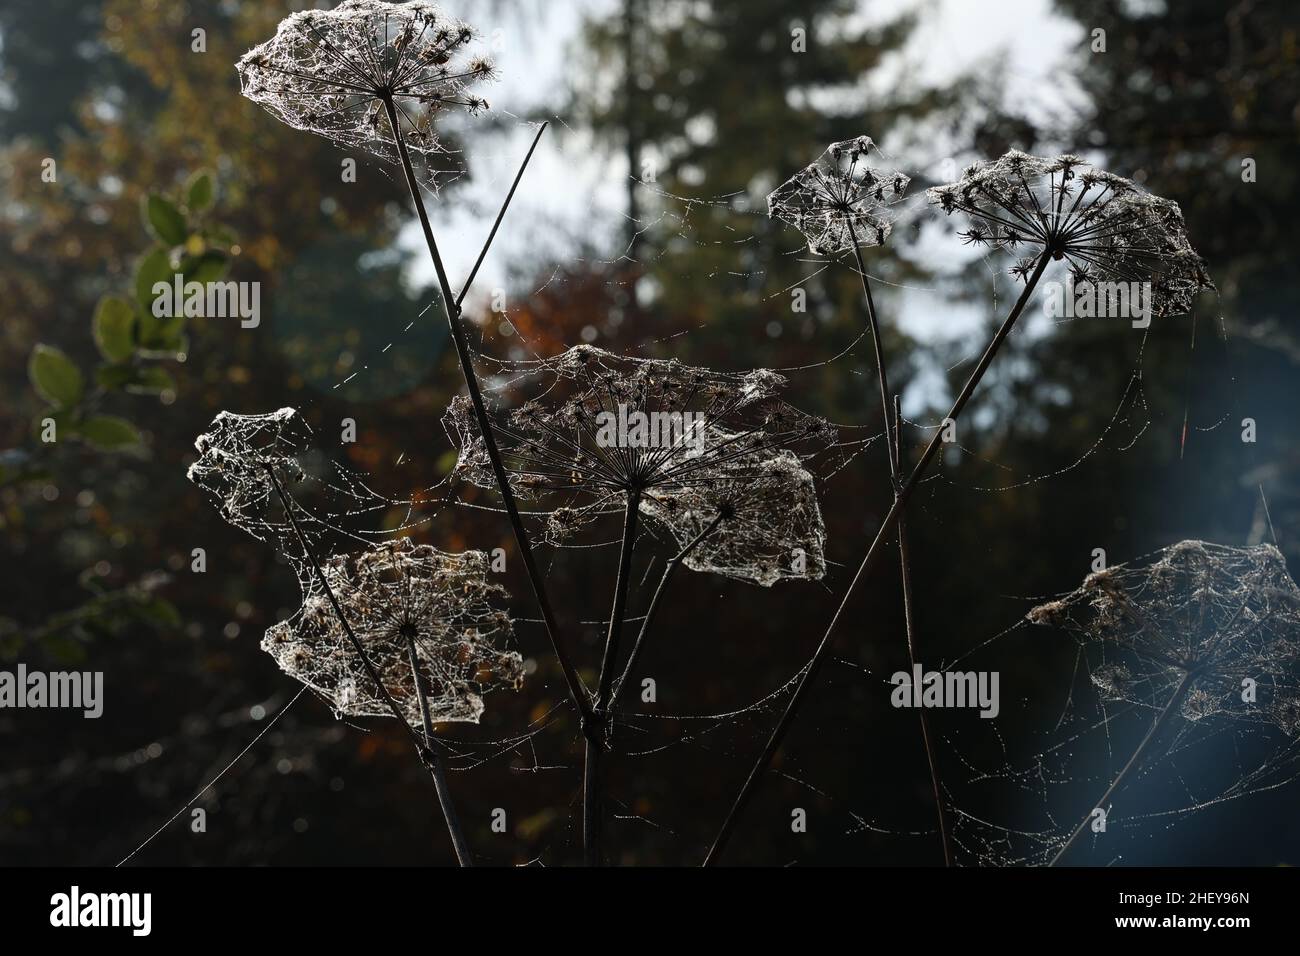 Dill umbrellas in cobwebs and morning dew. Stock Photo